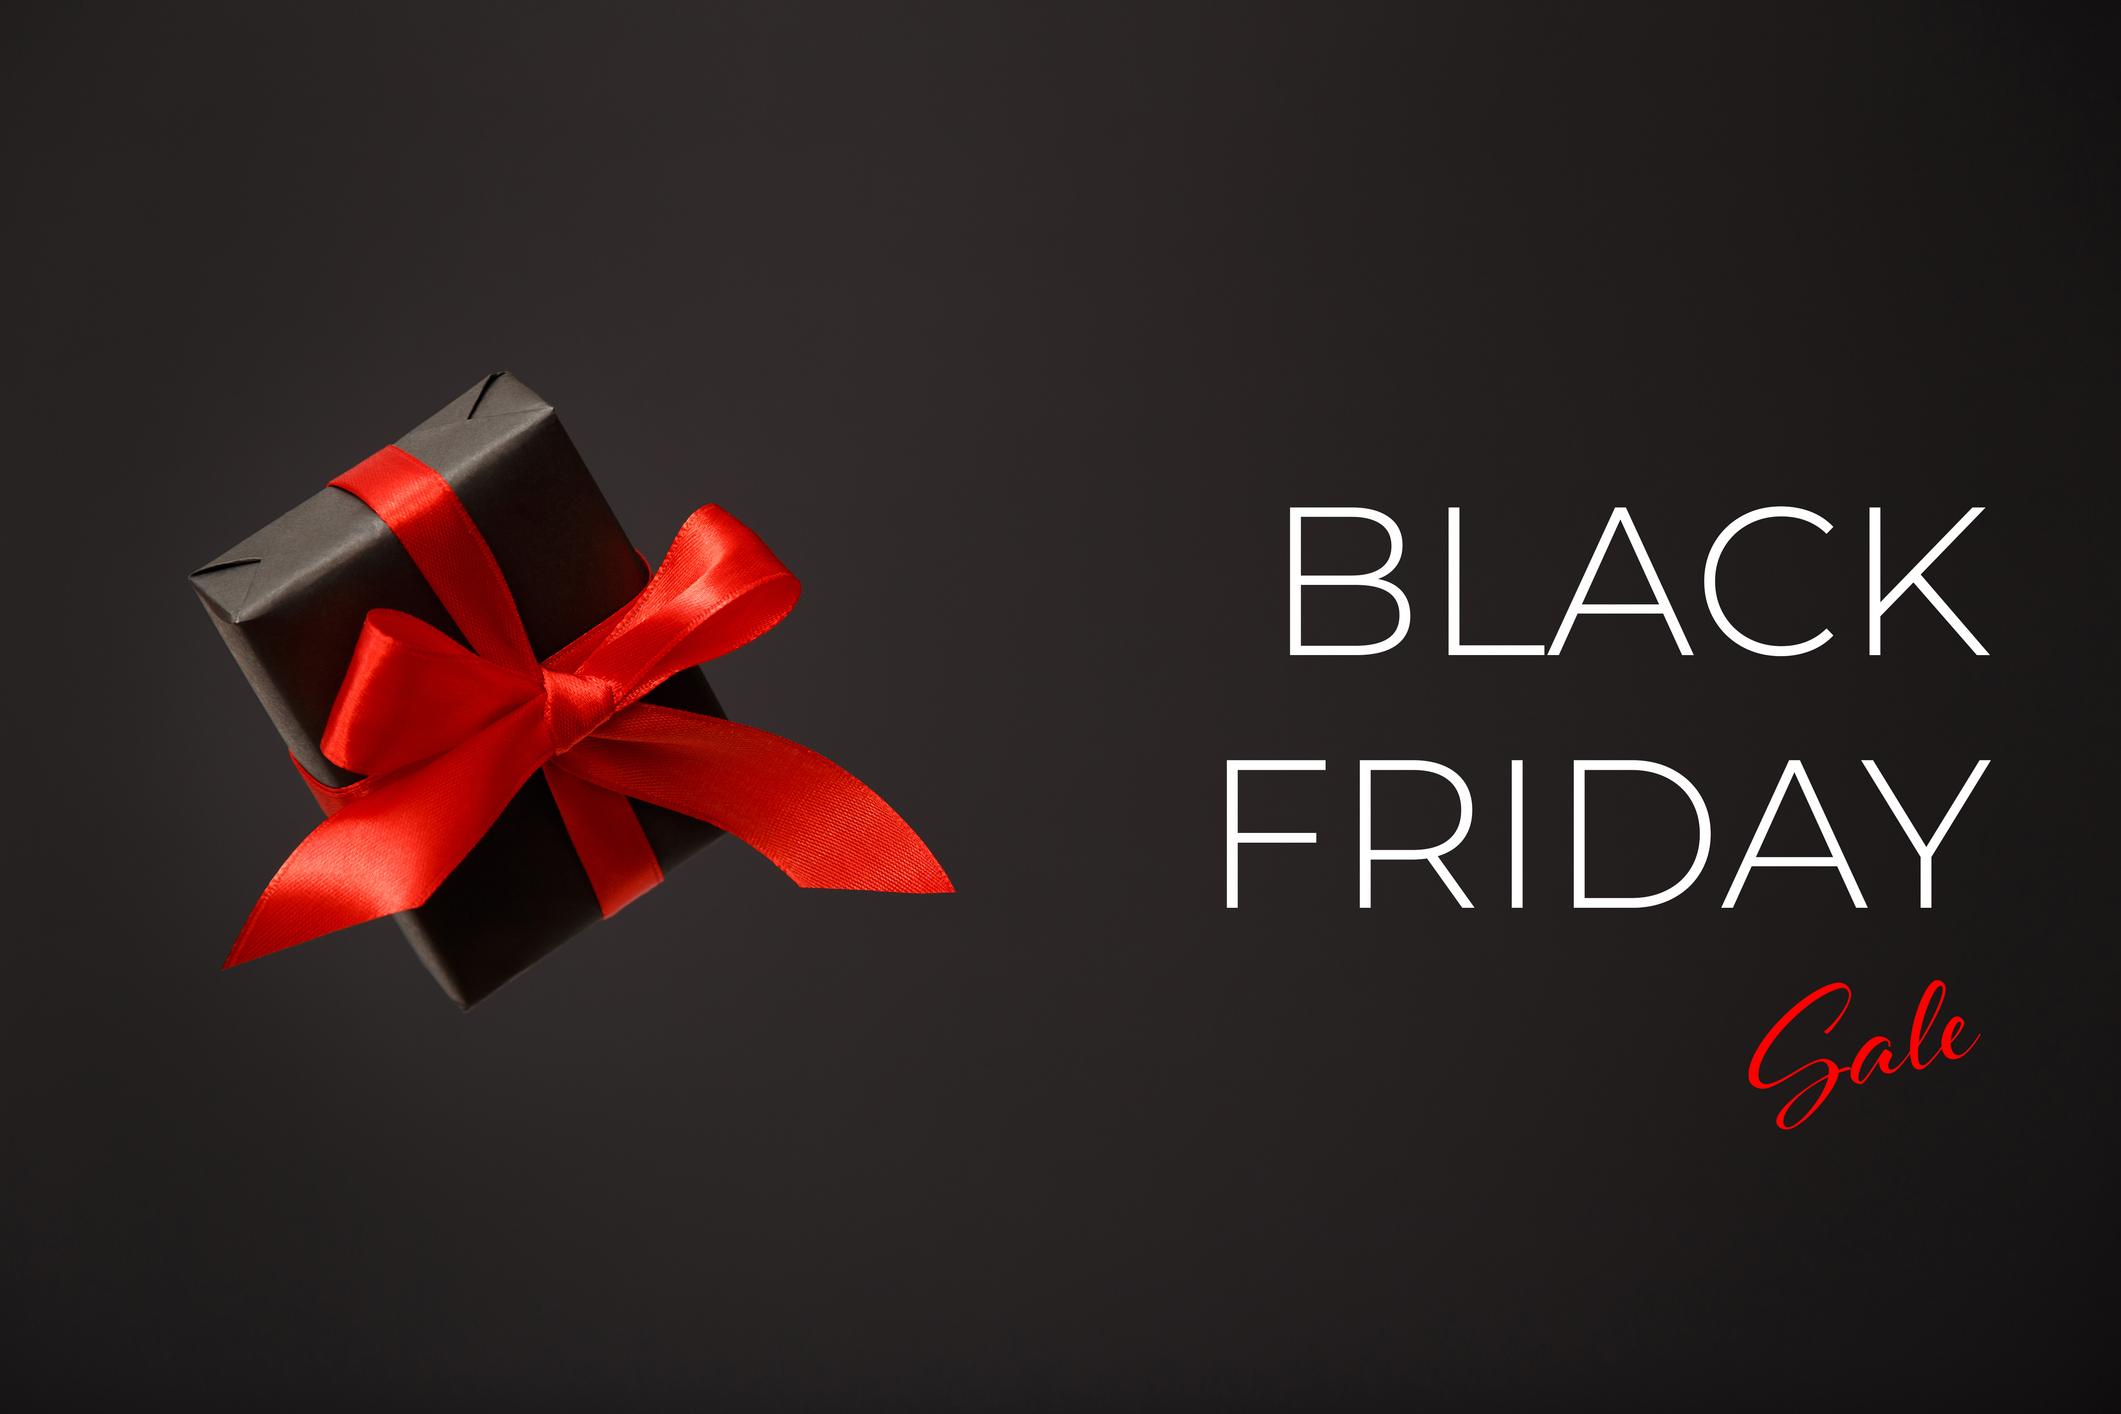  Black Friday sale. Black gift box with red bow floating in air on black background. Discount, online shopping concept 